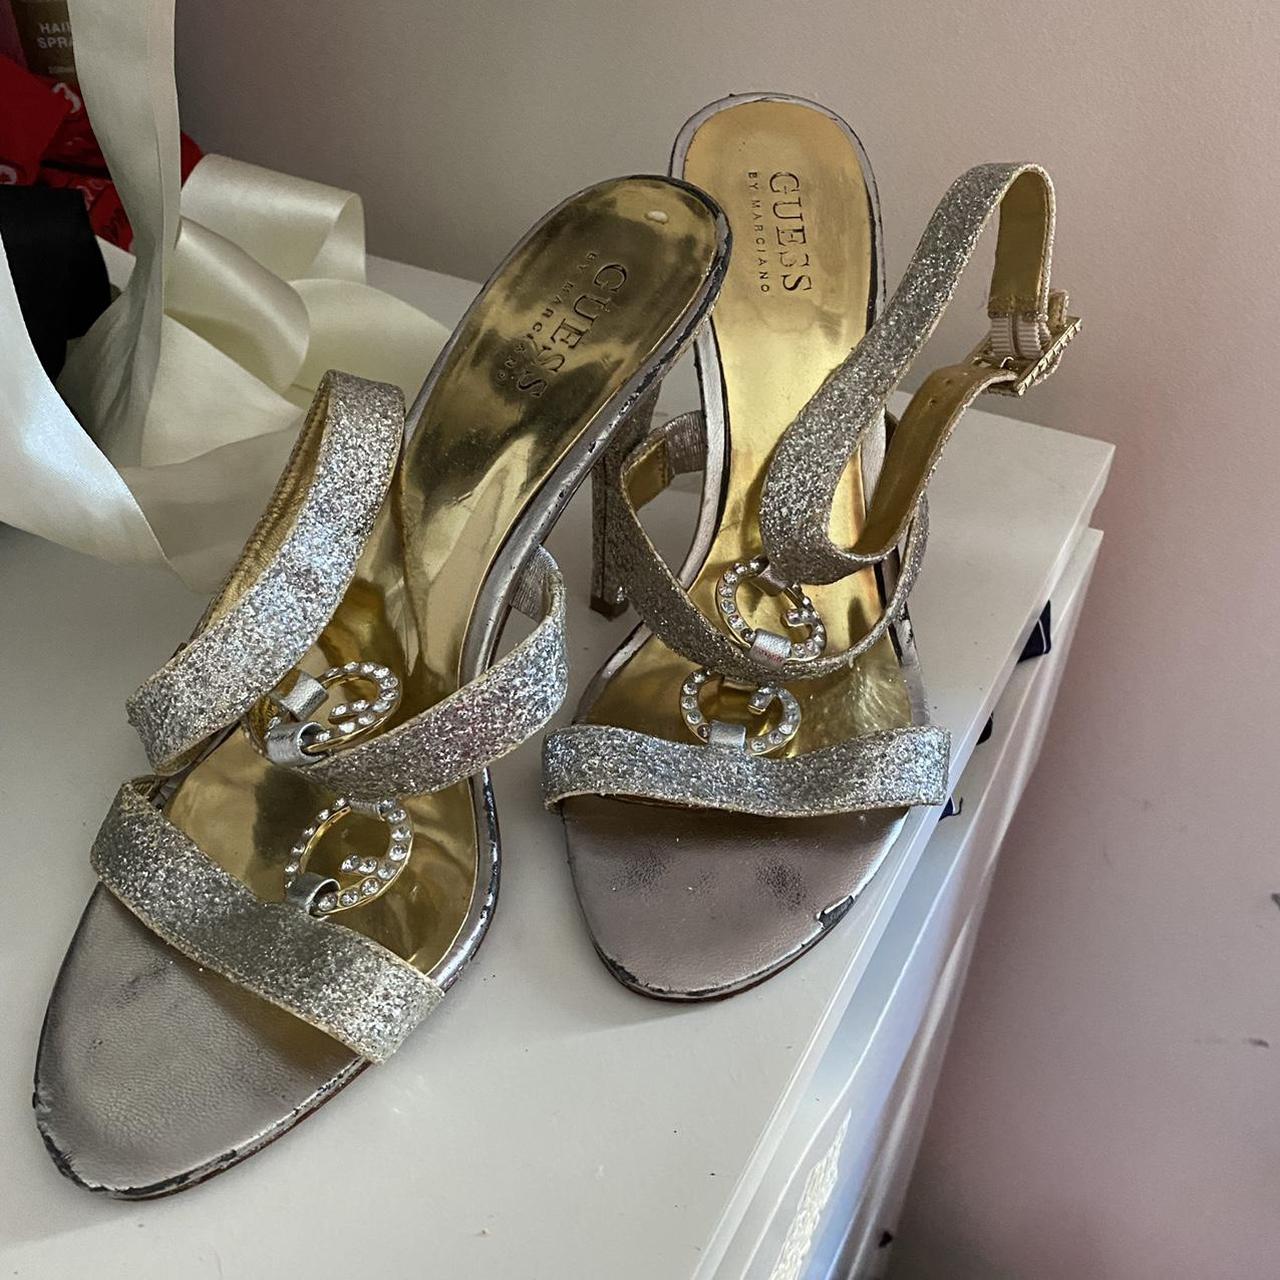 Product Image 1 - Vintage guess heels💗💗💗😭
Size 7 
Gold